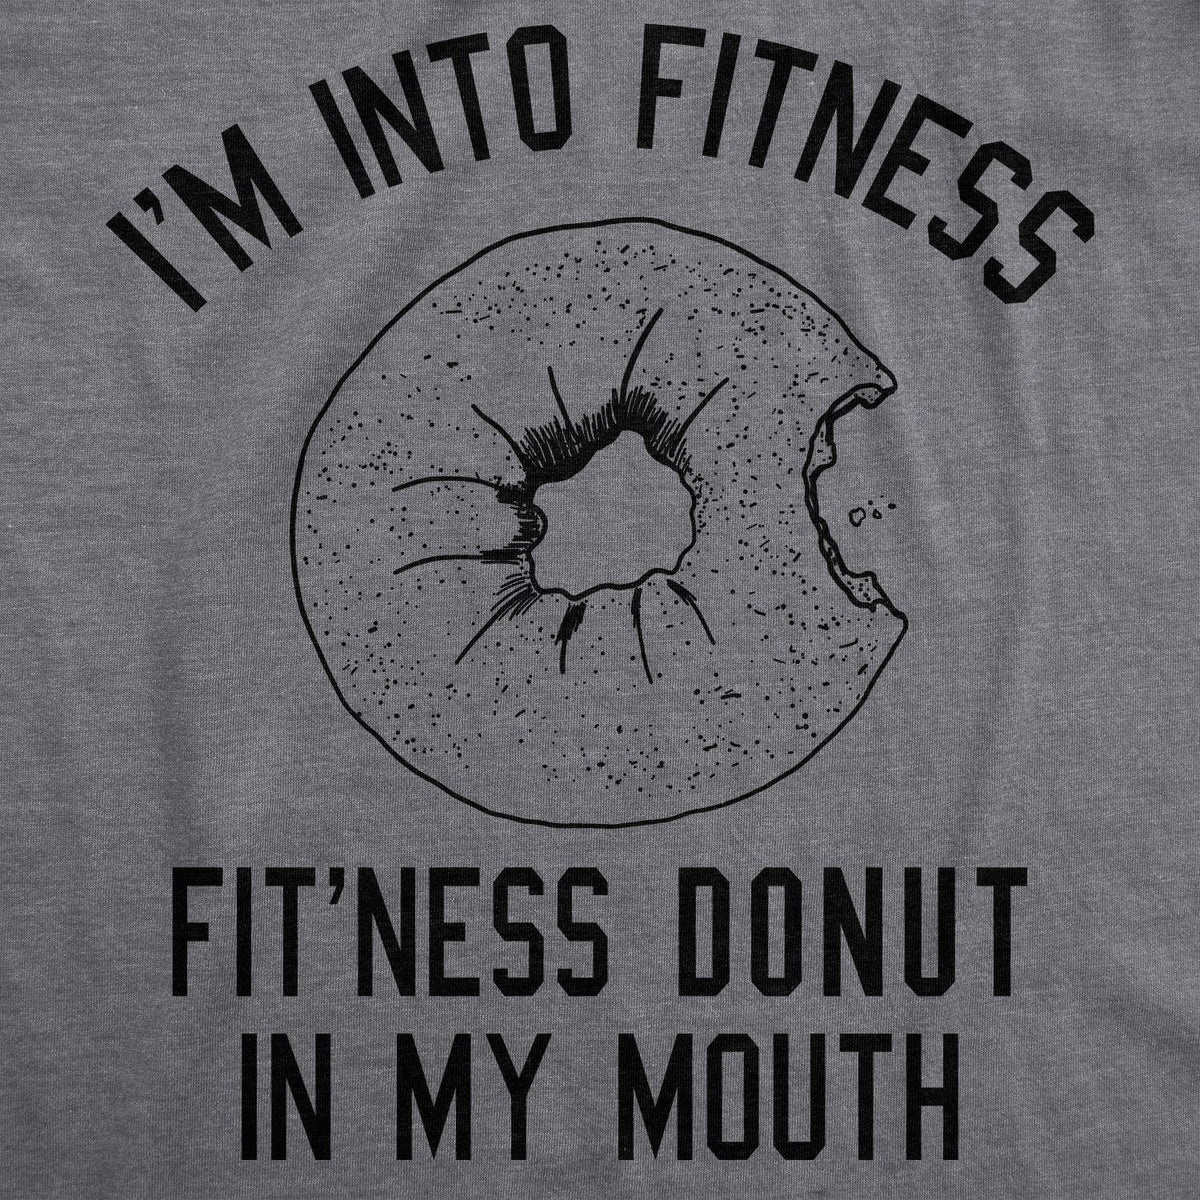 Fitness Donut In My Mouth Men&#39;s Tshirt  -  Crazy Dog T-Shirts